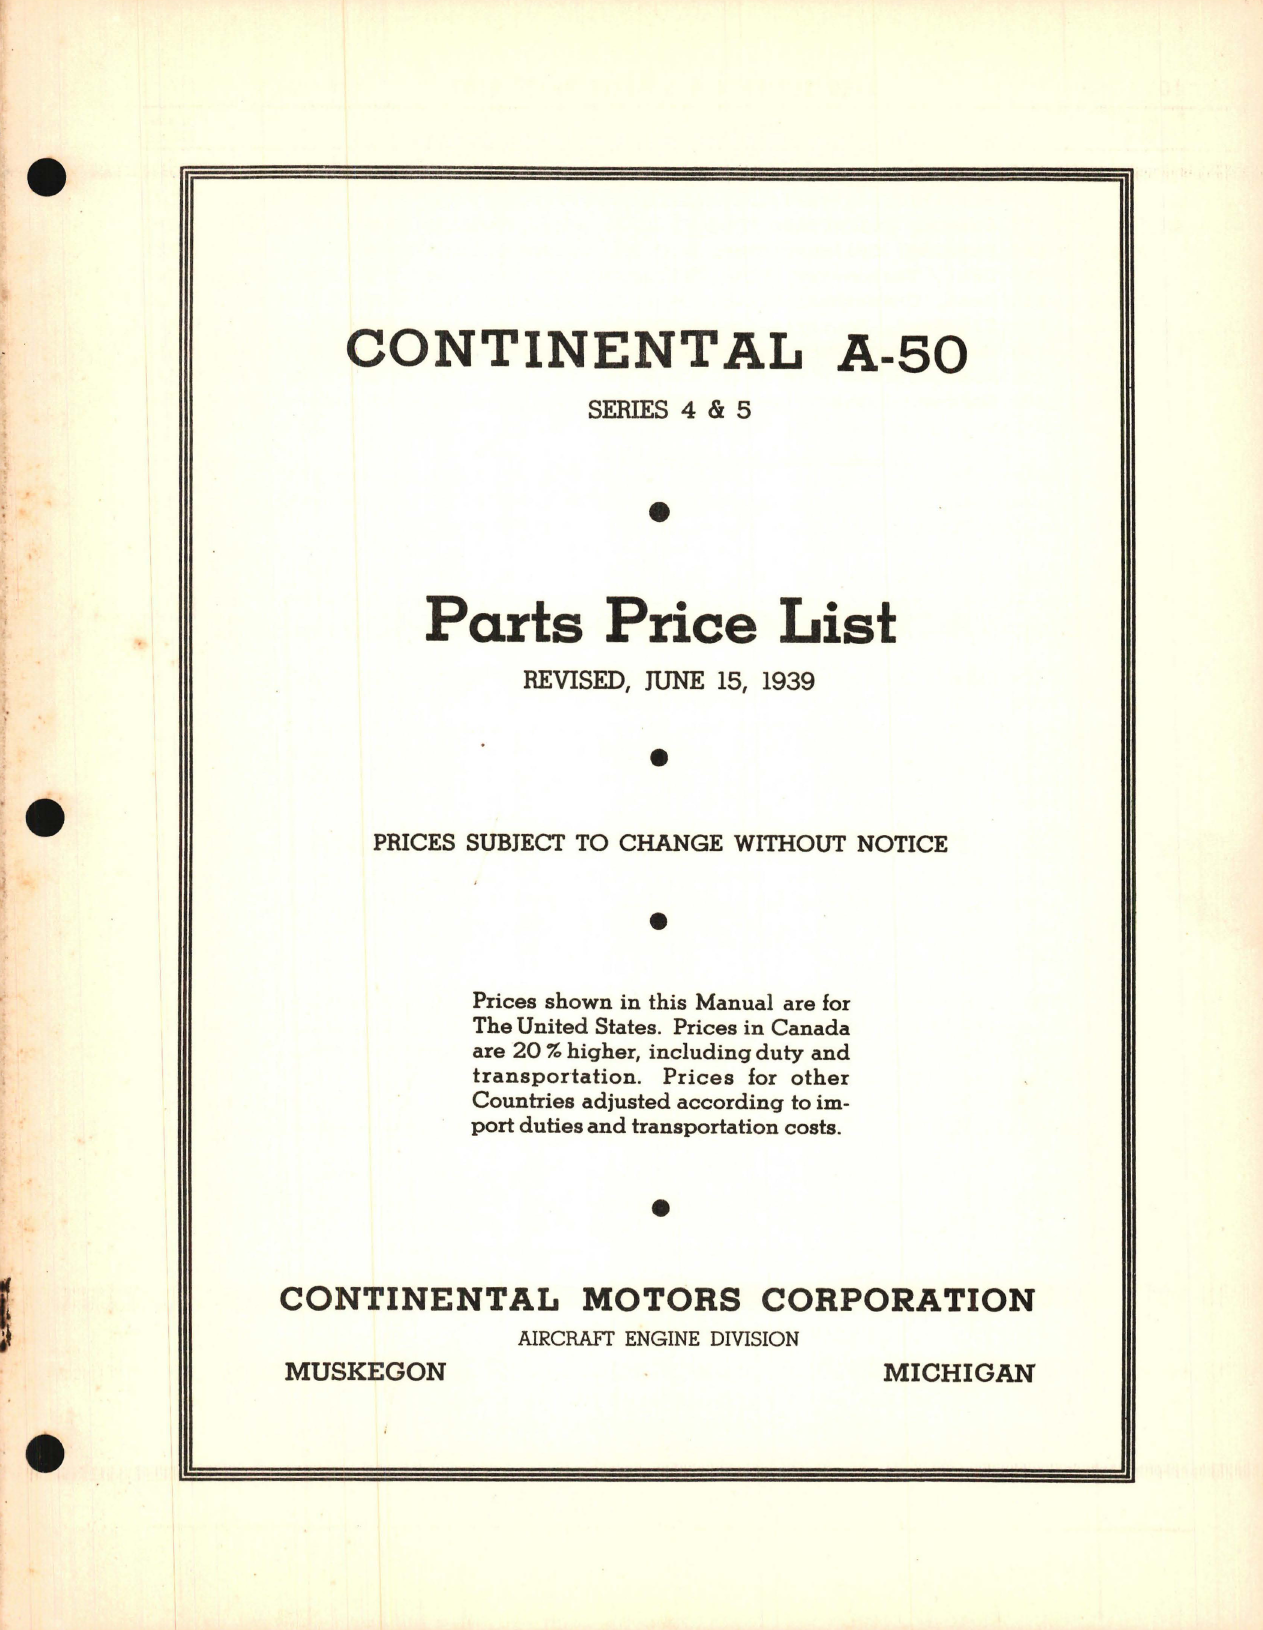 Sample page 1 from AirCorps Library document: Parts Price List for Continental A-50 Series 4 and 5